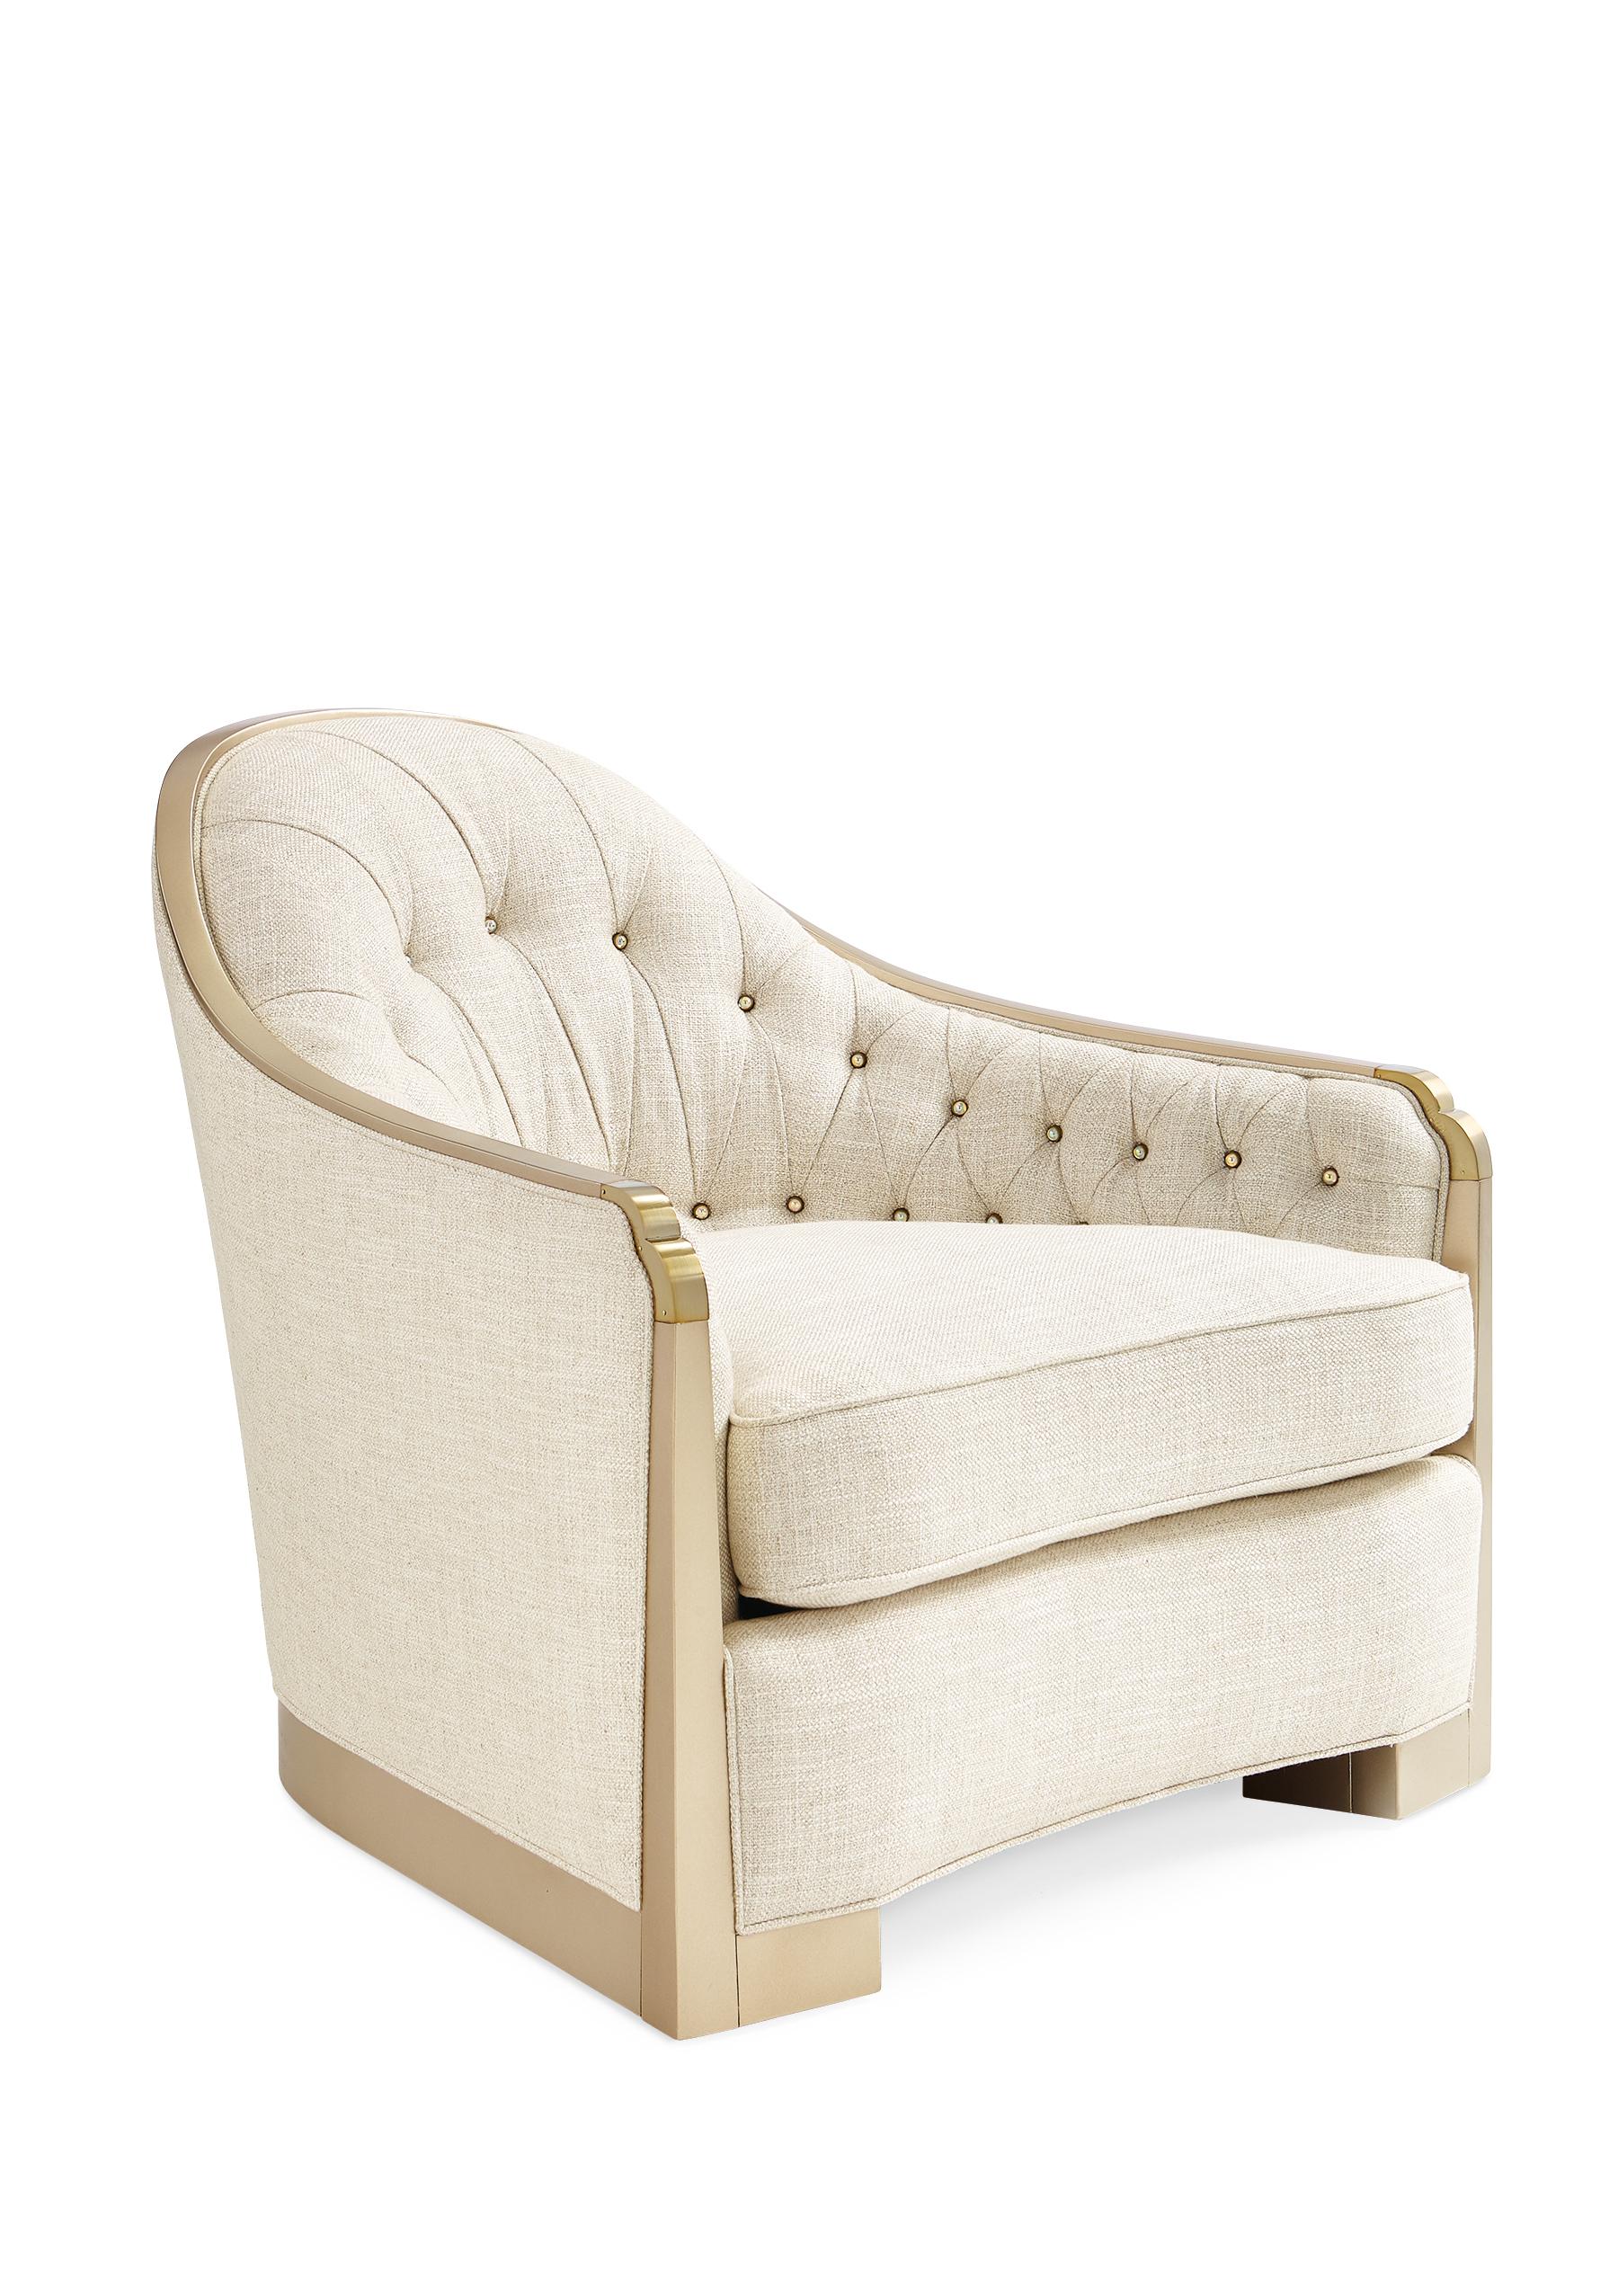 Traditional Accent Chair SHE'S A CHARMER UPH-018-131-A in Cream, Gold, Champagne Fabric